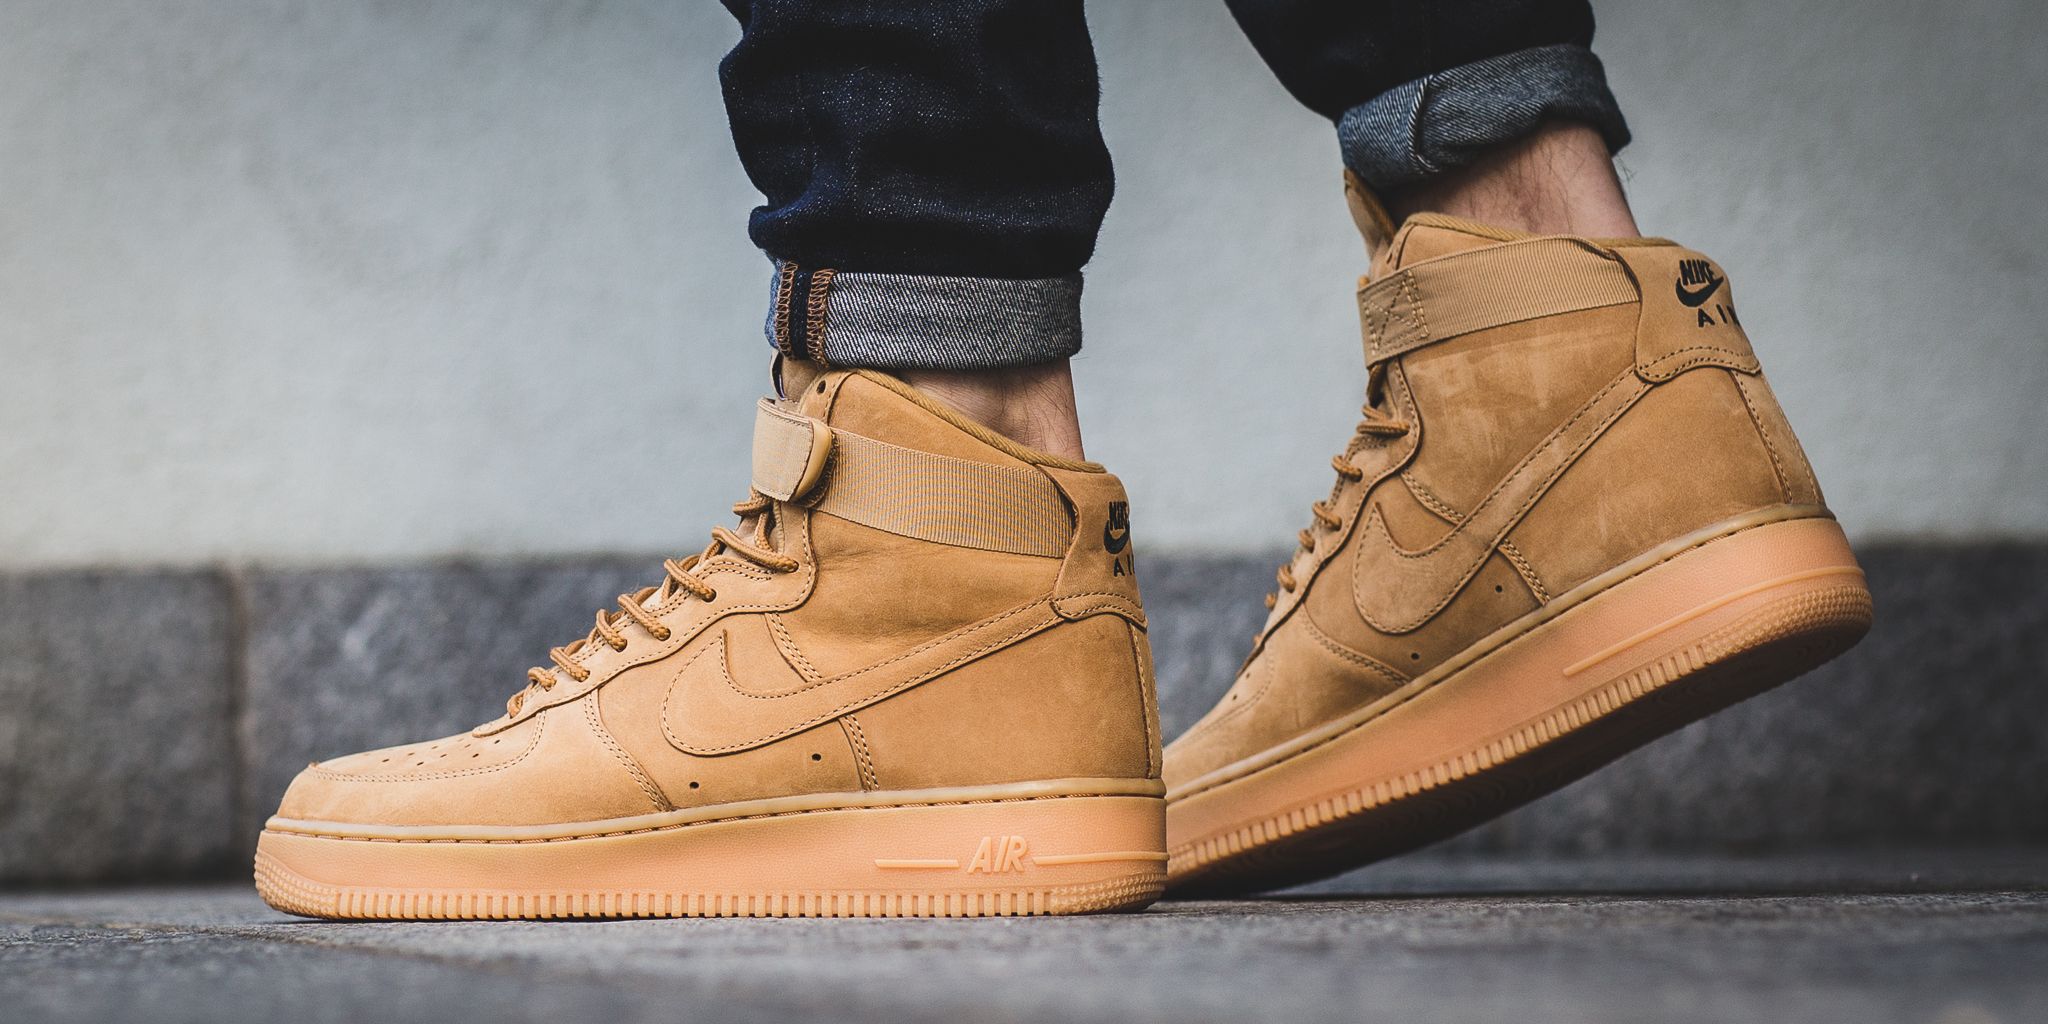 Titolo on Twitter: "#lastsizes Air Force 1 High '07 LV8 WB - Flax/Flax-Outdoor Green shop here ▶︎ https://t.co/aGsqSzWGwY #nike #flax #wheat https://t.co/BsXo7jmgMy" / Twitter